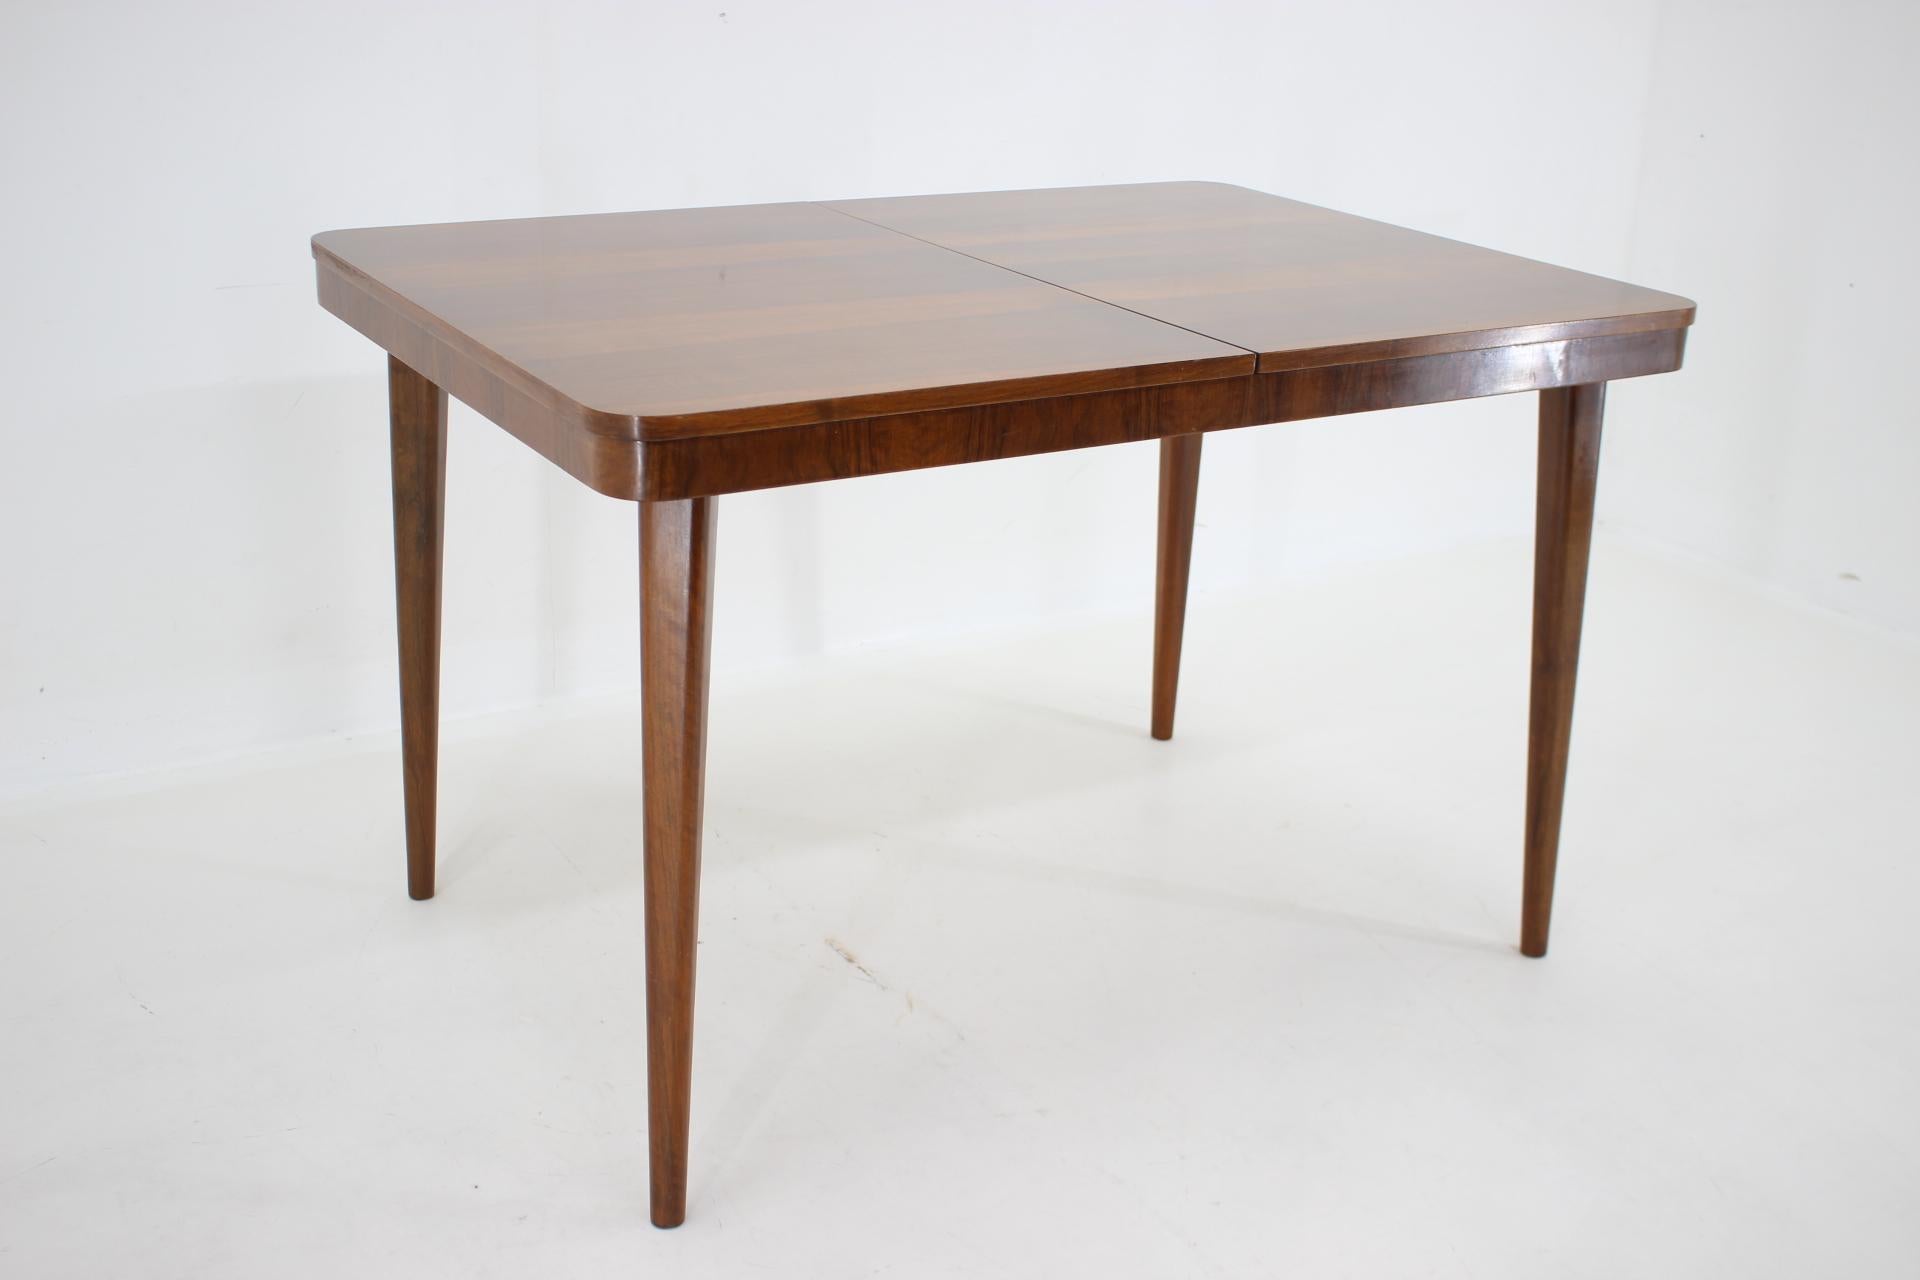 1950s Extendable Dining Table in Walnut by UP zavody, Czechoslovakia In Good Condition For Sale In Praha, CZ